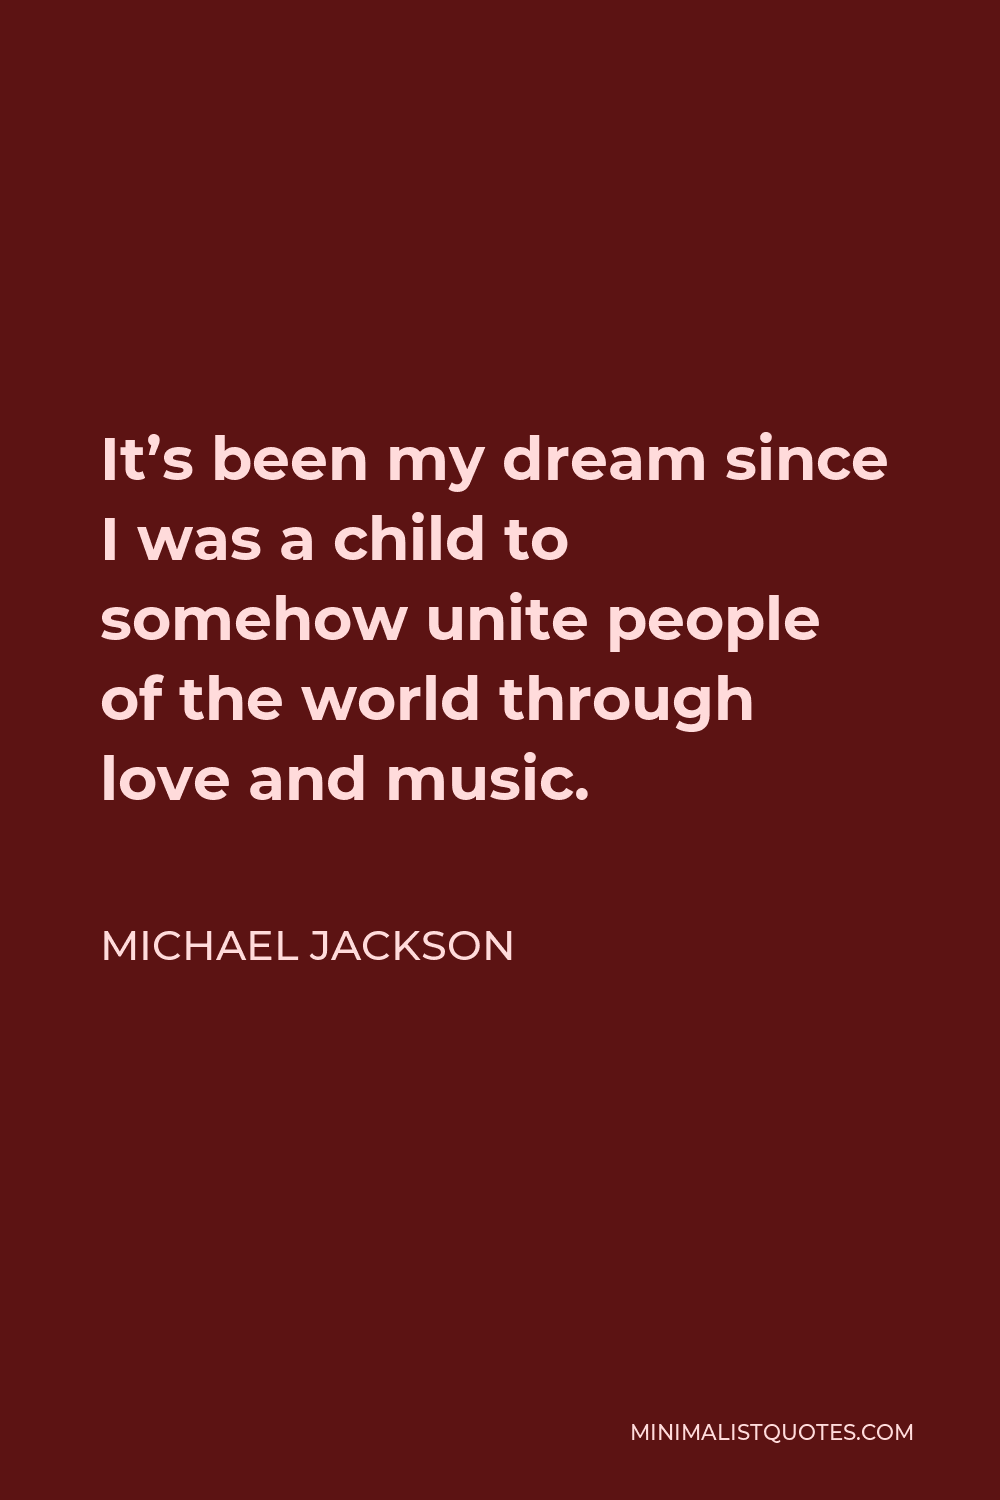 Michael Jackson Quote - It’s been my dream since I was a child to somehow unite people of the world through love and music.